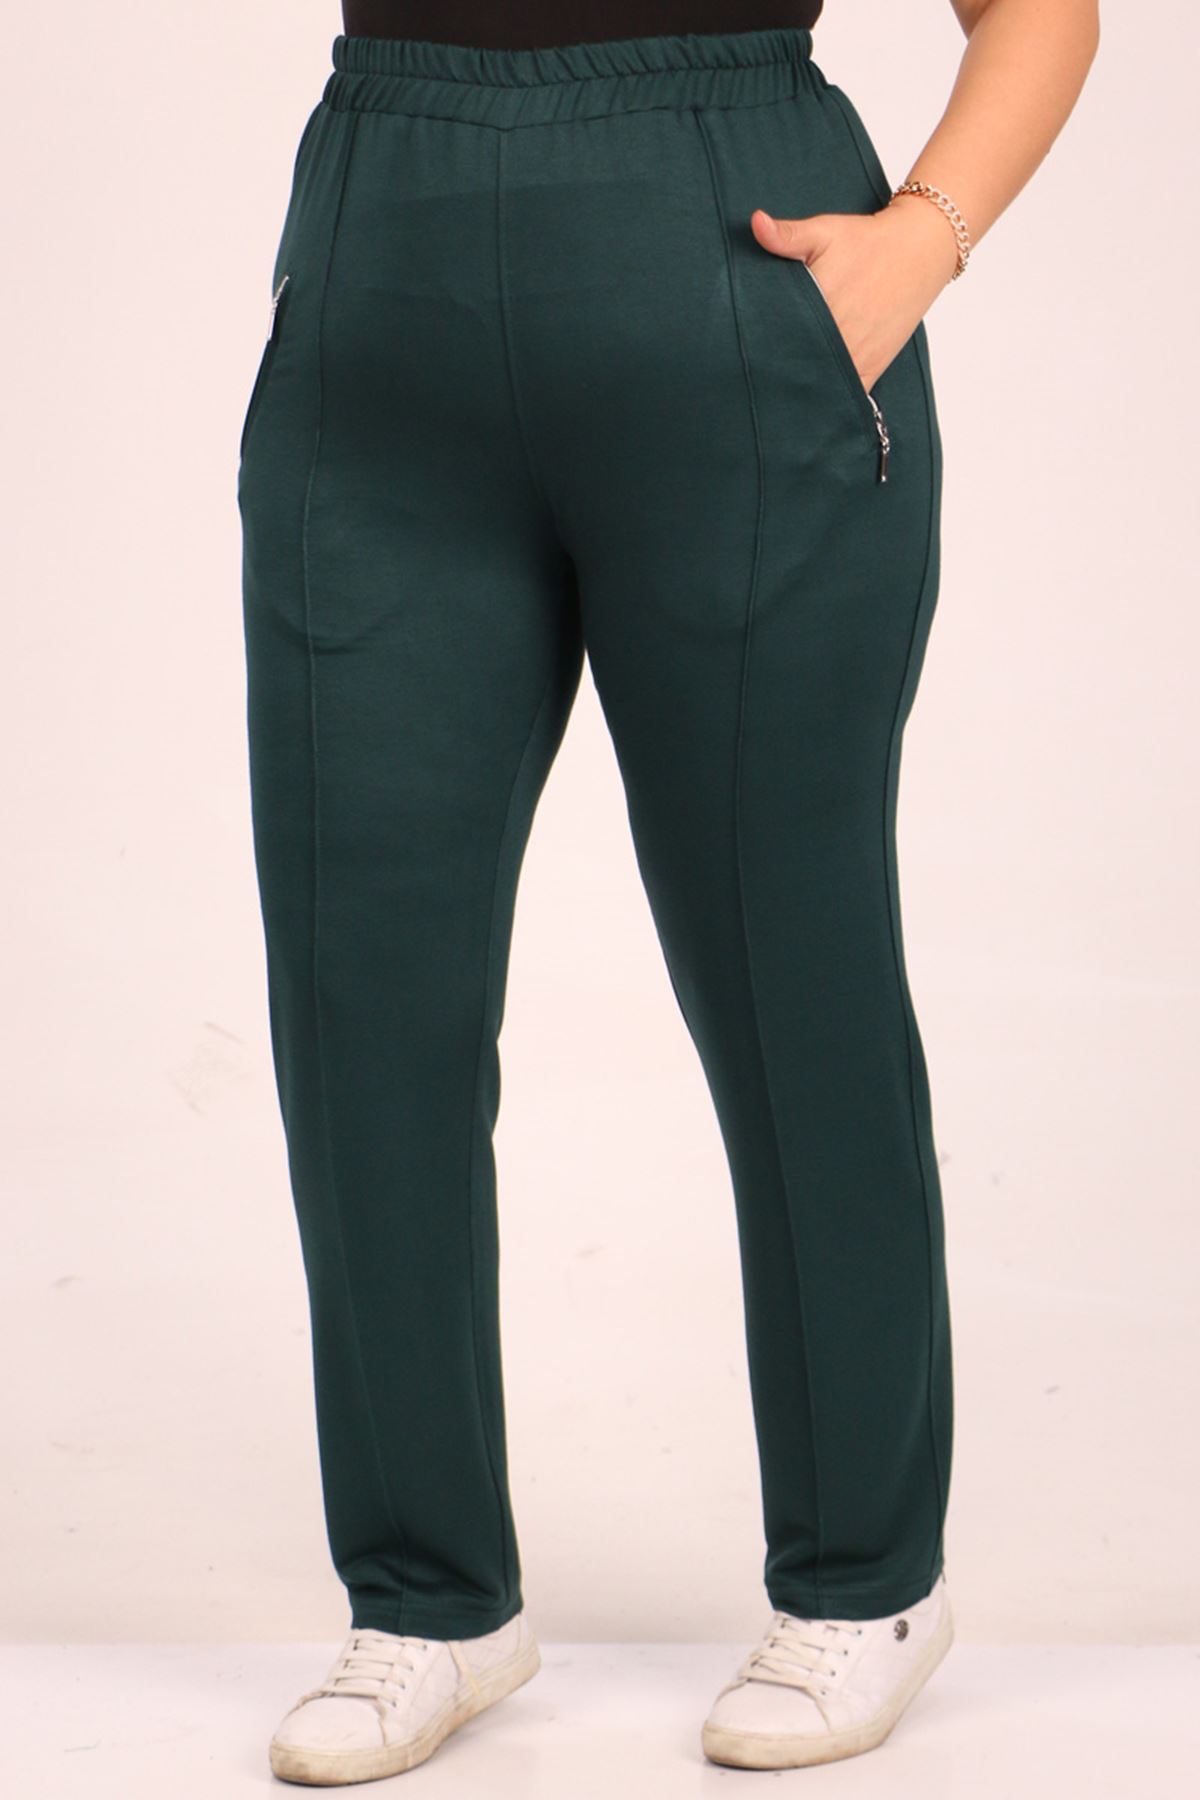 39504 Plus Size Crystal Two Thread Sweatpants-Emerald